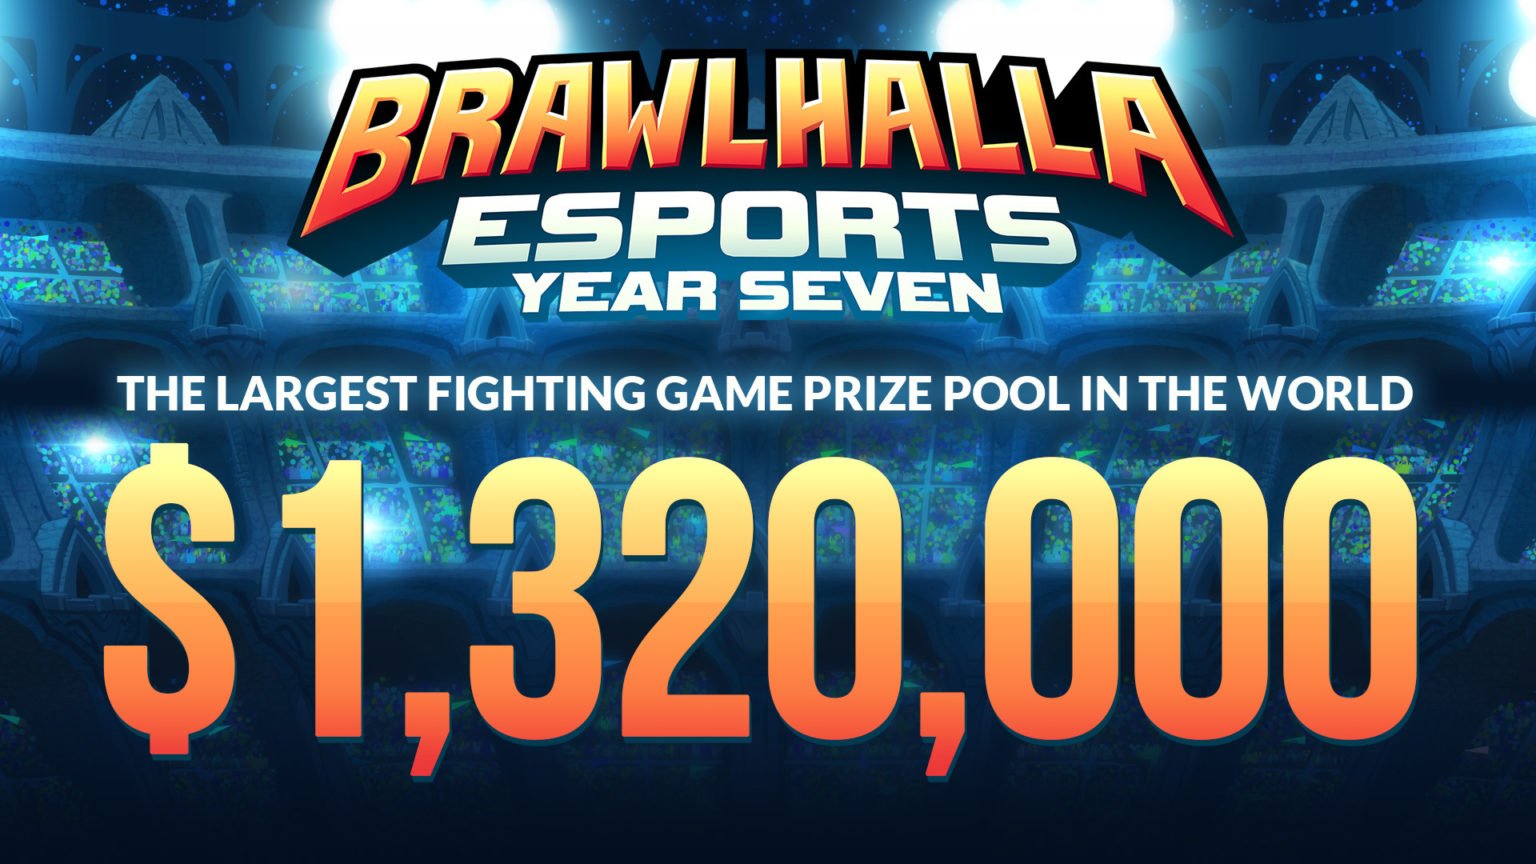 Brawlhalla Esports to feature largest fighting game prize pool of all